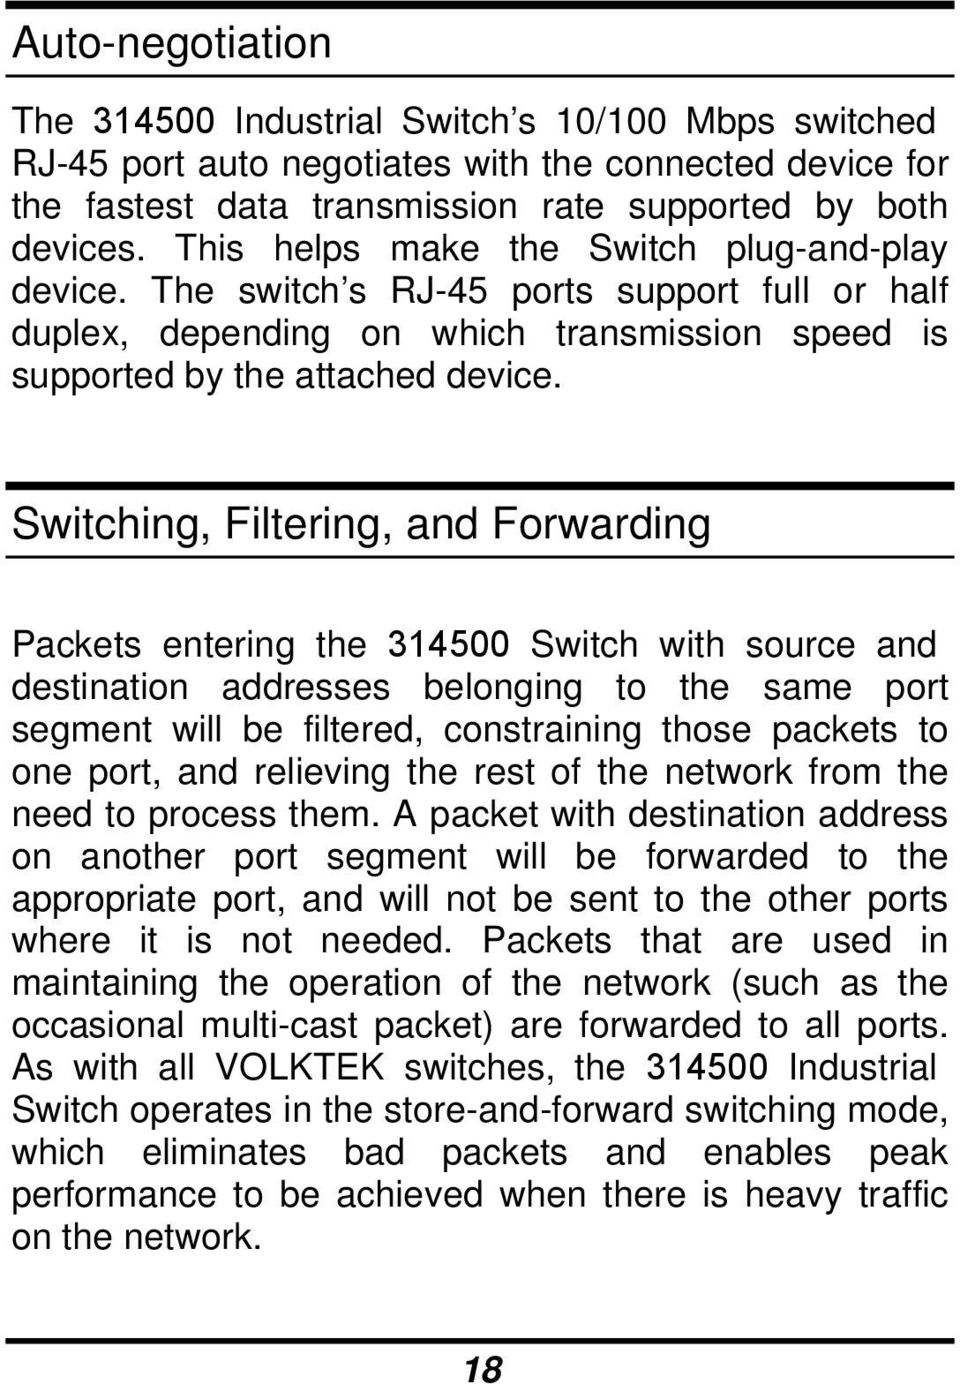 Switching, Filtering, and Forwarding Packets entering the 314500 Switch with source and destination addresses belonging to the same port segment will be filtered, constraining those packets to one